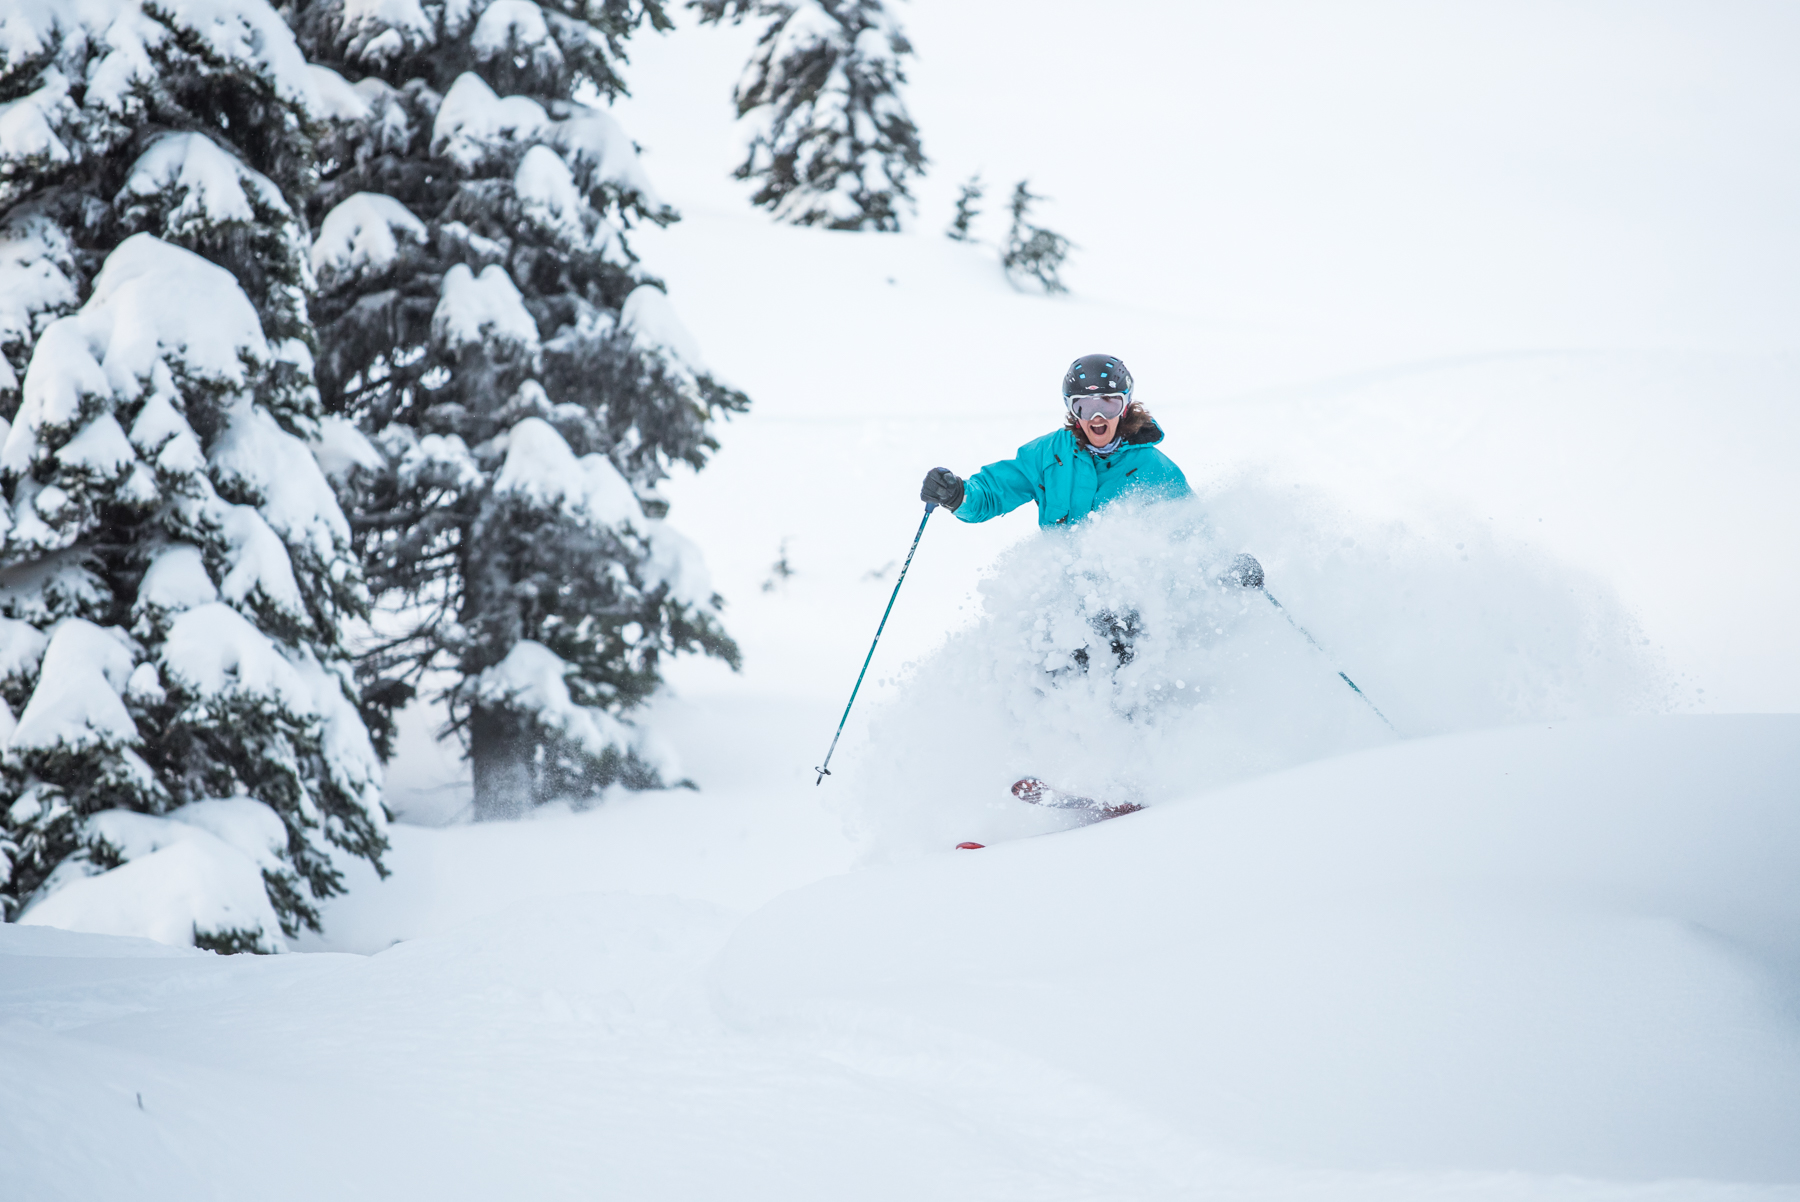 Whistler, B.C. Conditions Report: 320